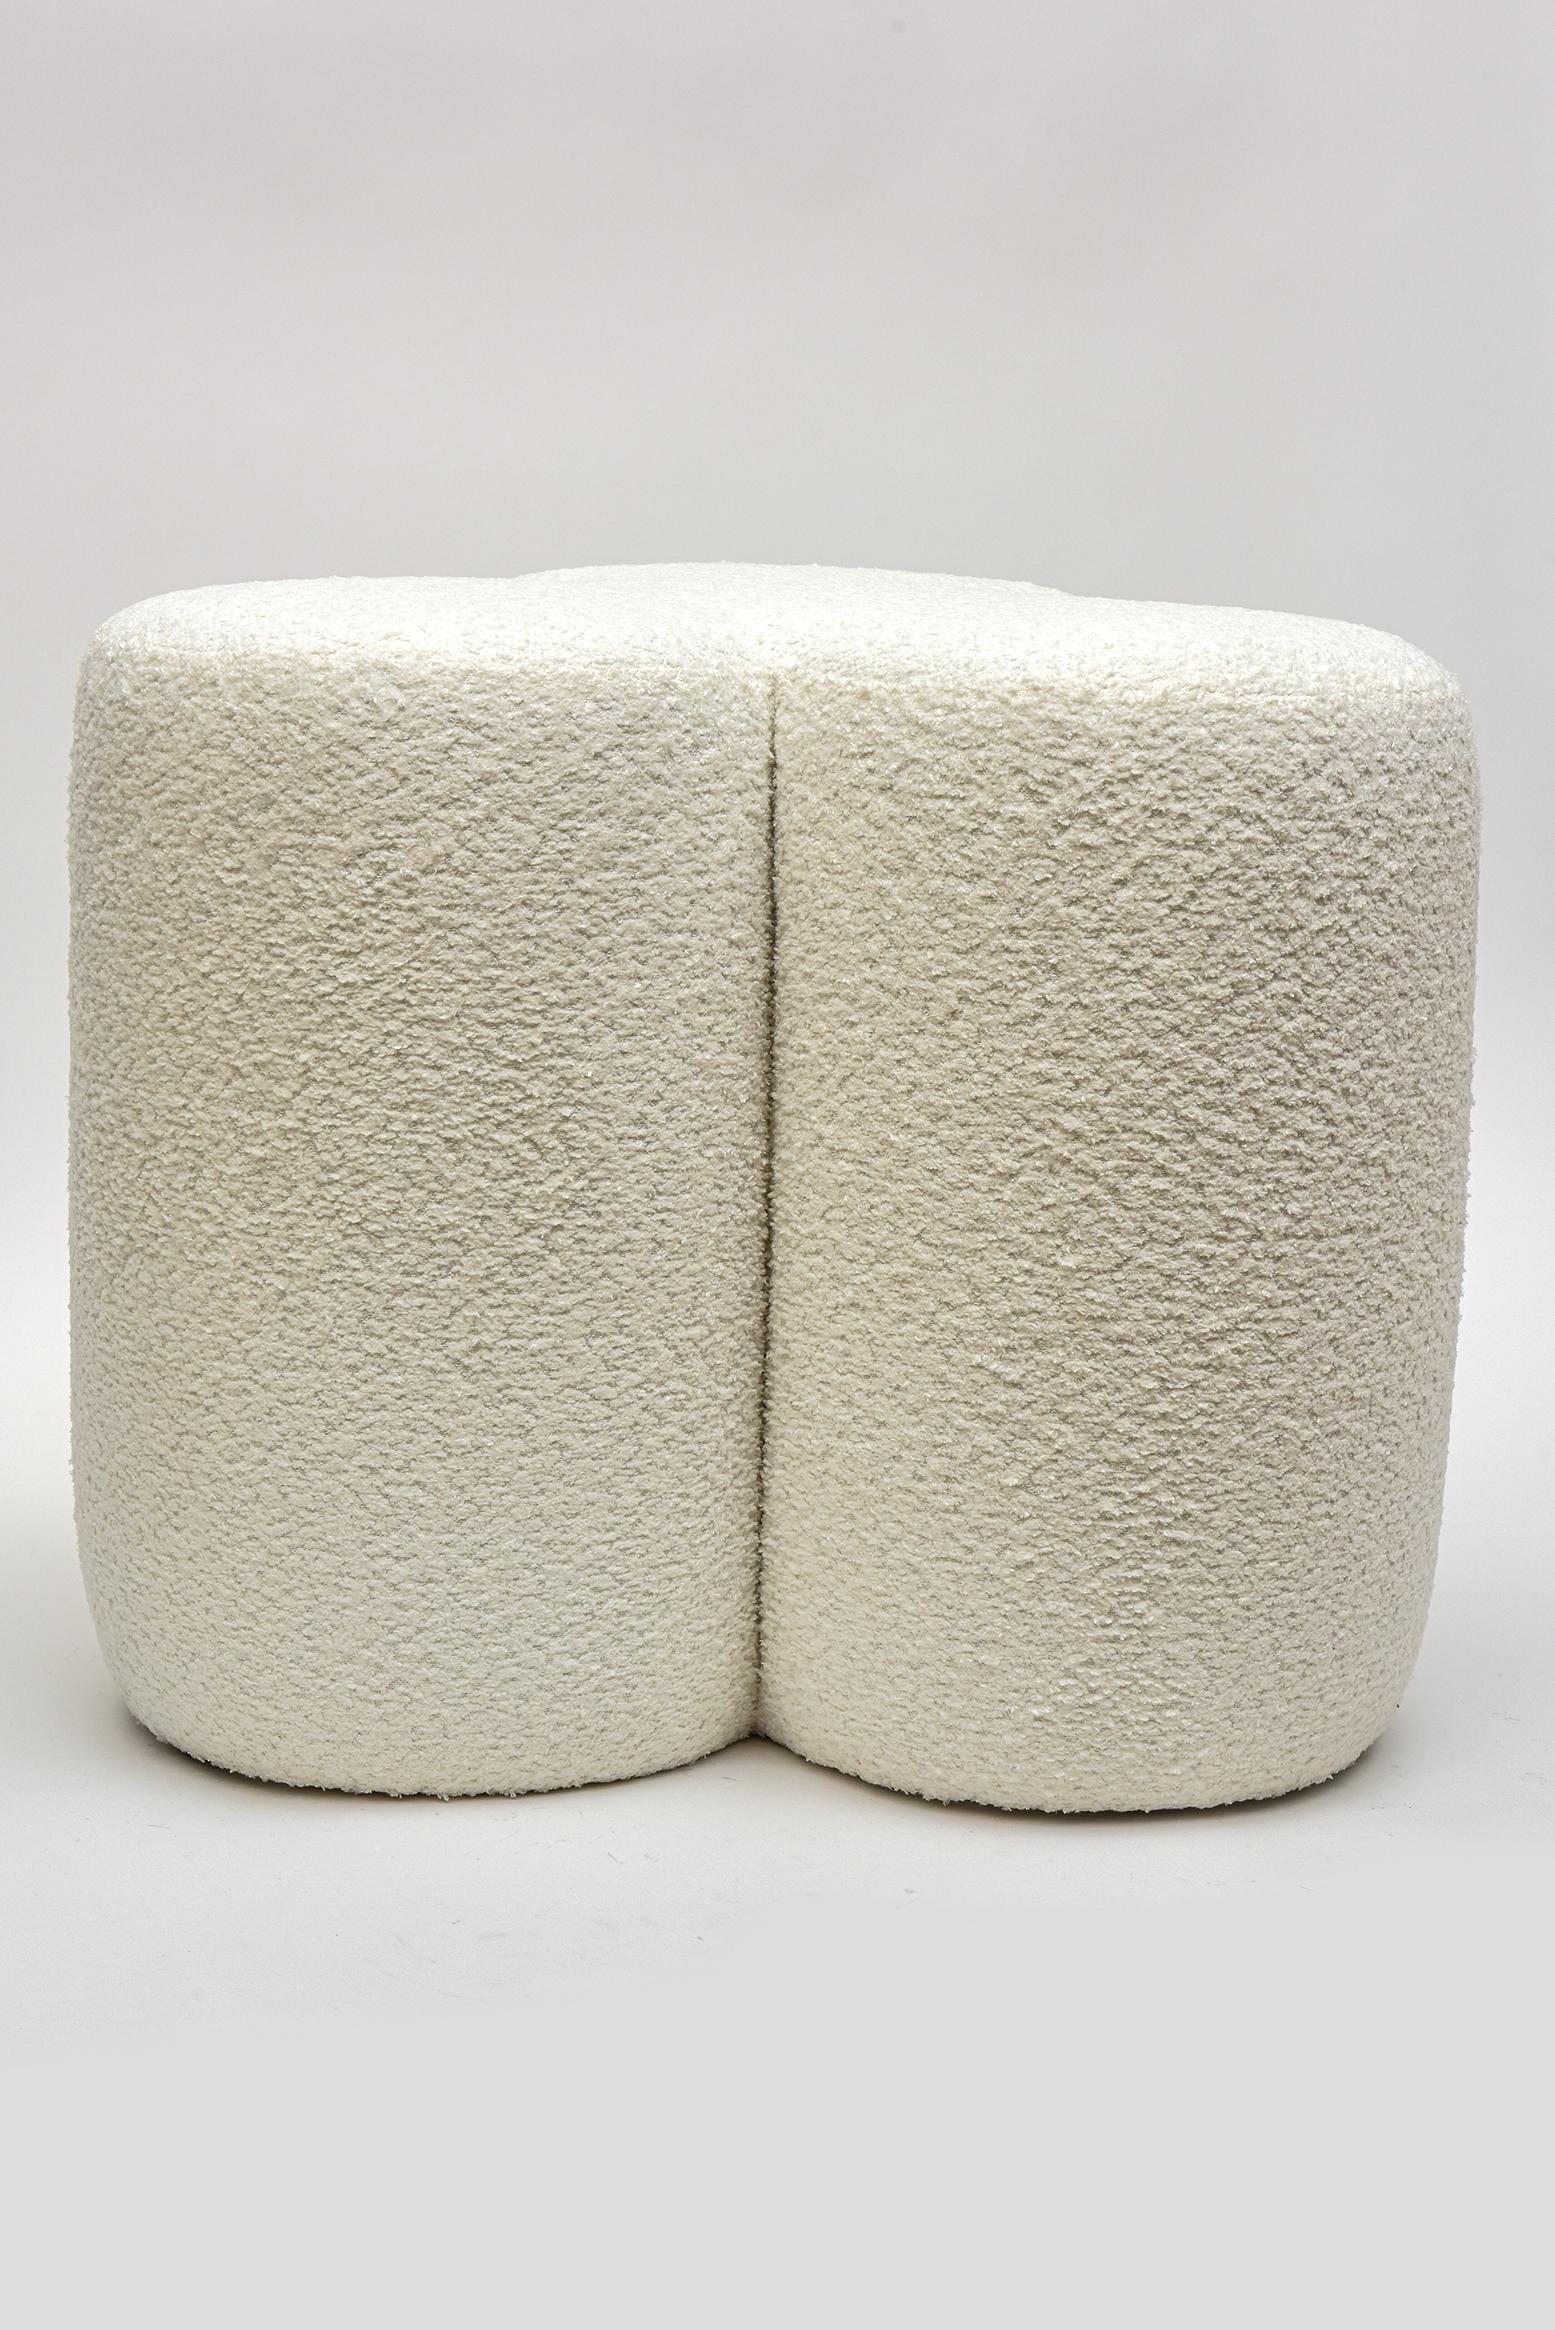 Custom Made Limited Edition Ottomans or Benches With Off White Boucle Upholstery For Sale 2